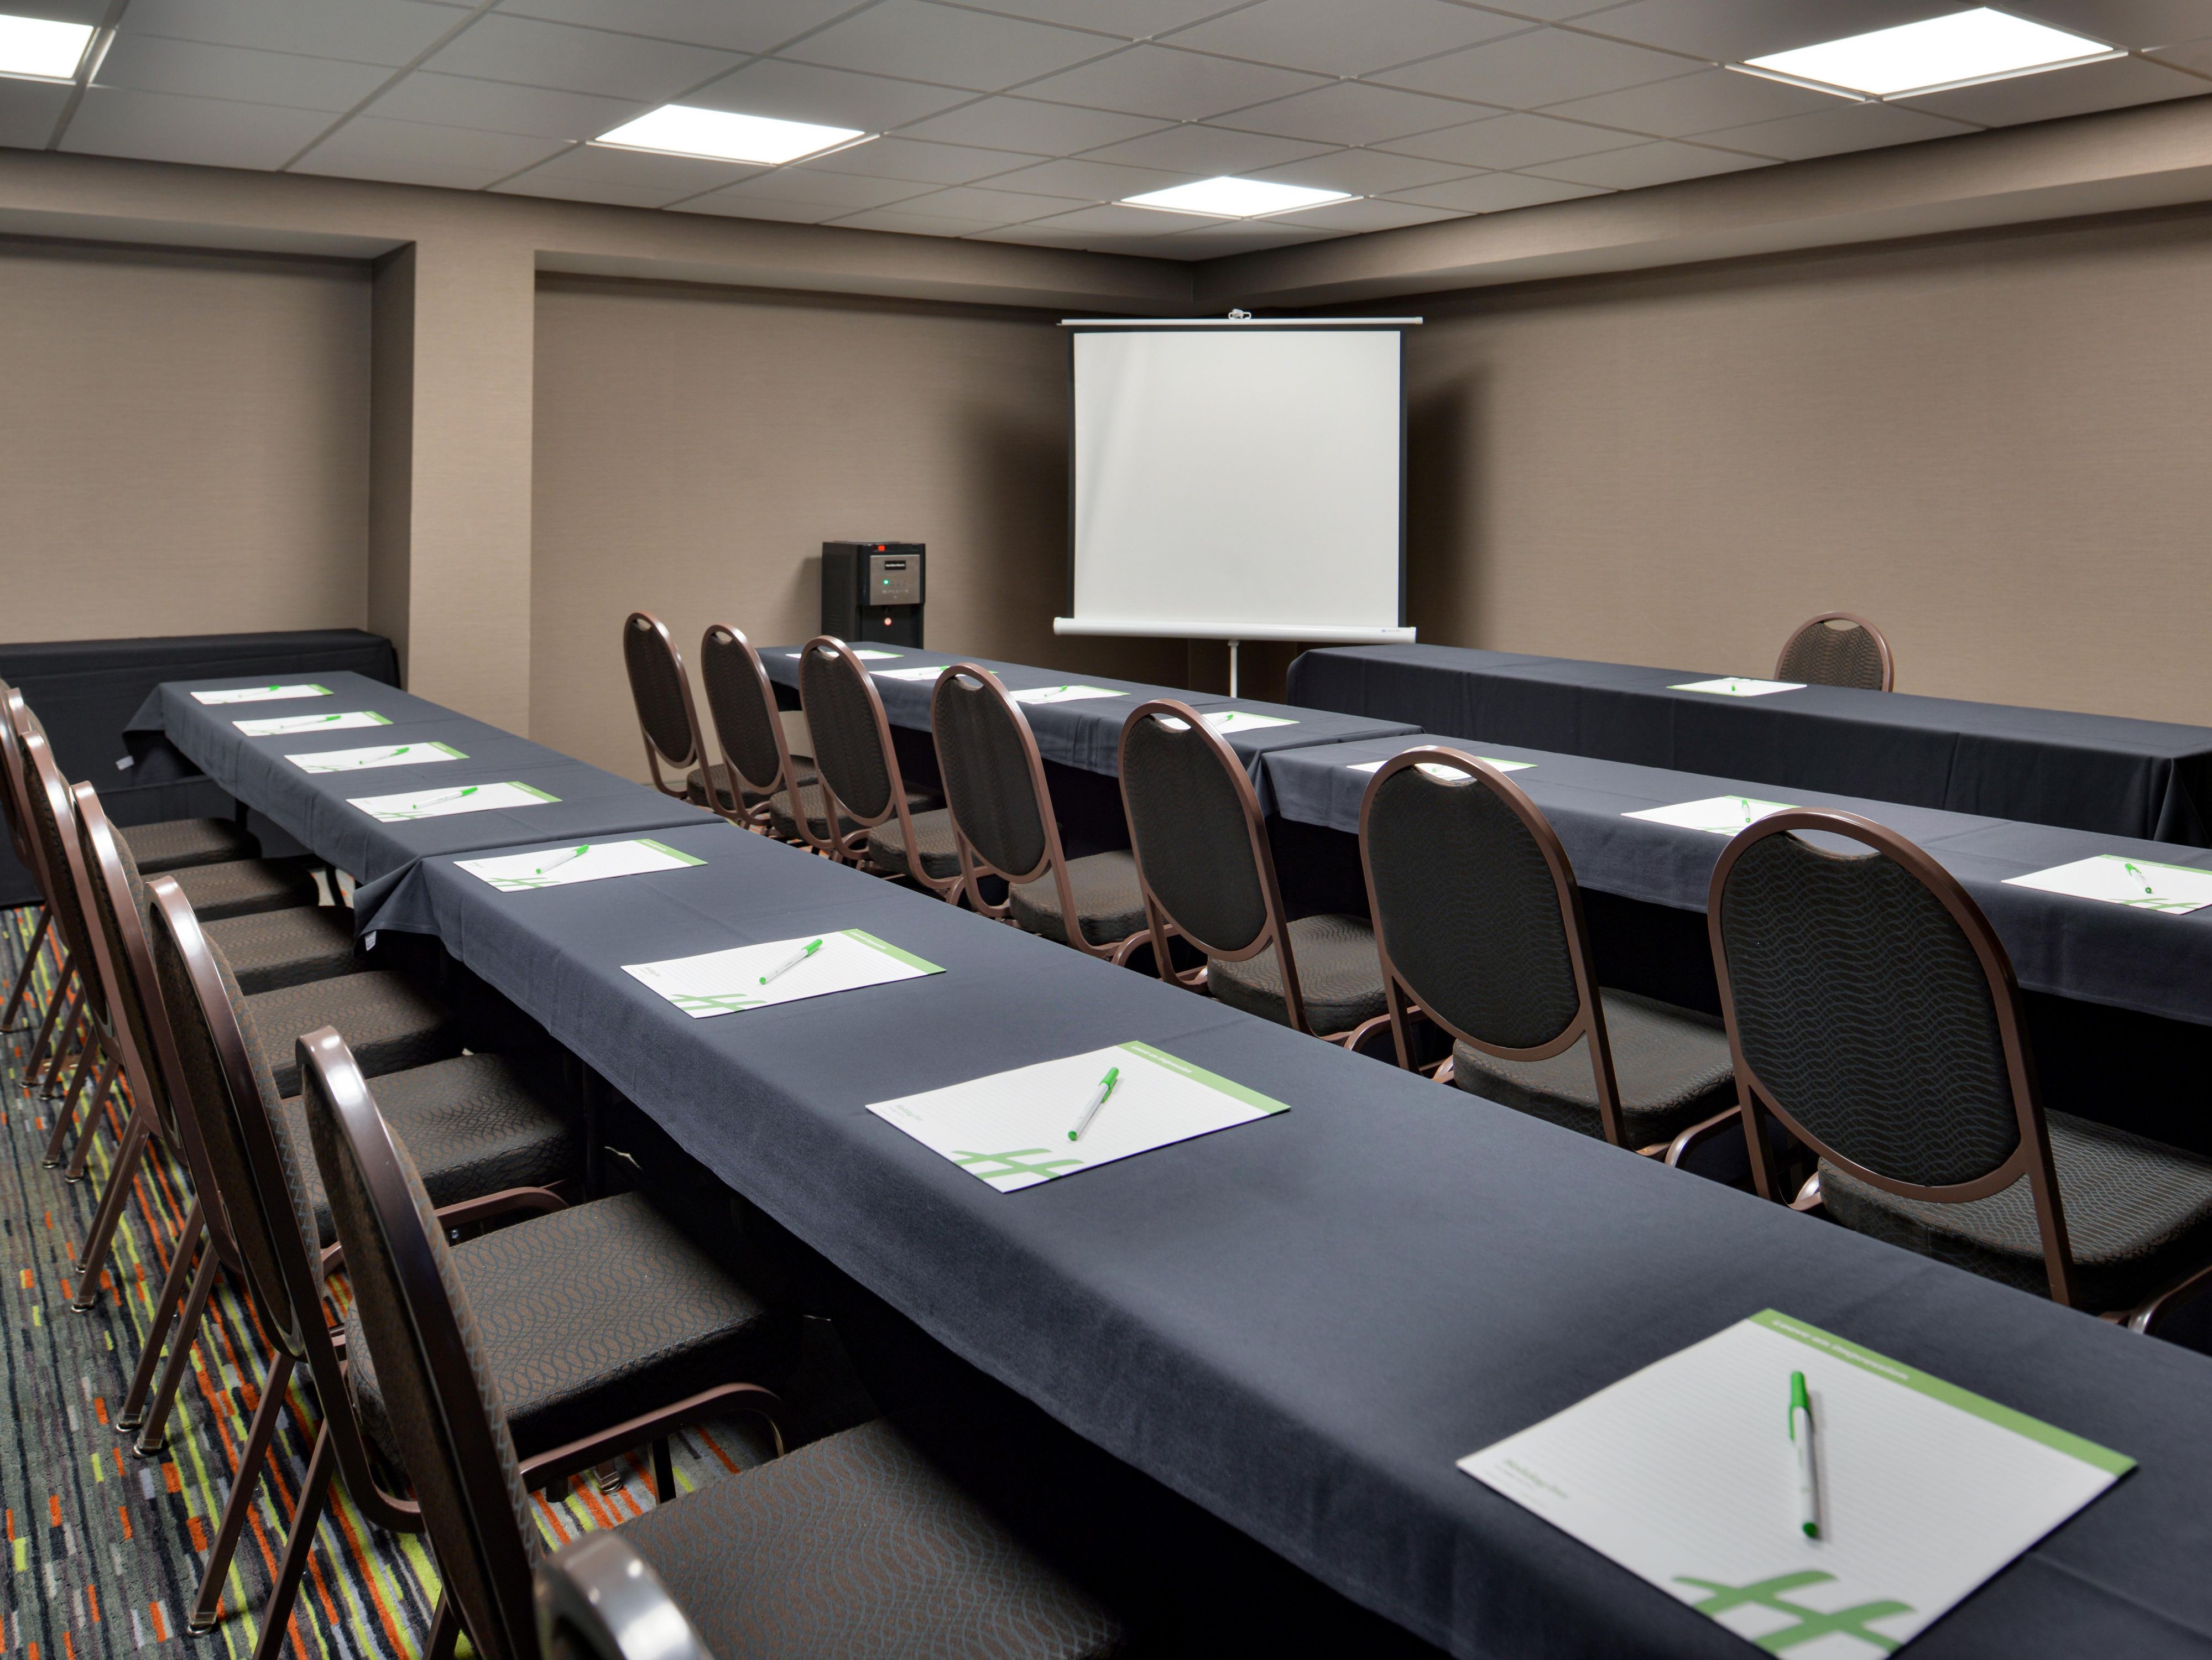 We have 4 meeting spaces to accommodate your various needs. Our largest room is 1800 square feet. Call our sales department today to see how we can make your next meeting, corporate event, party or banquet a success.